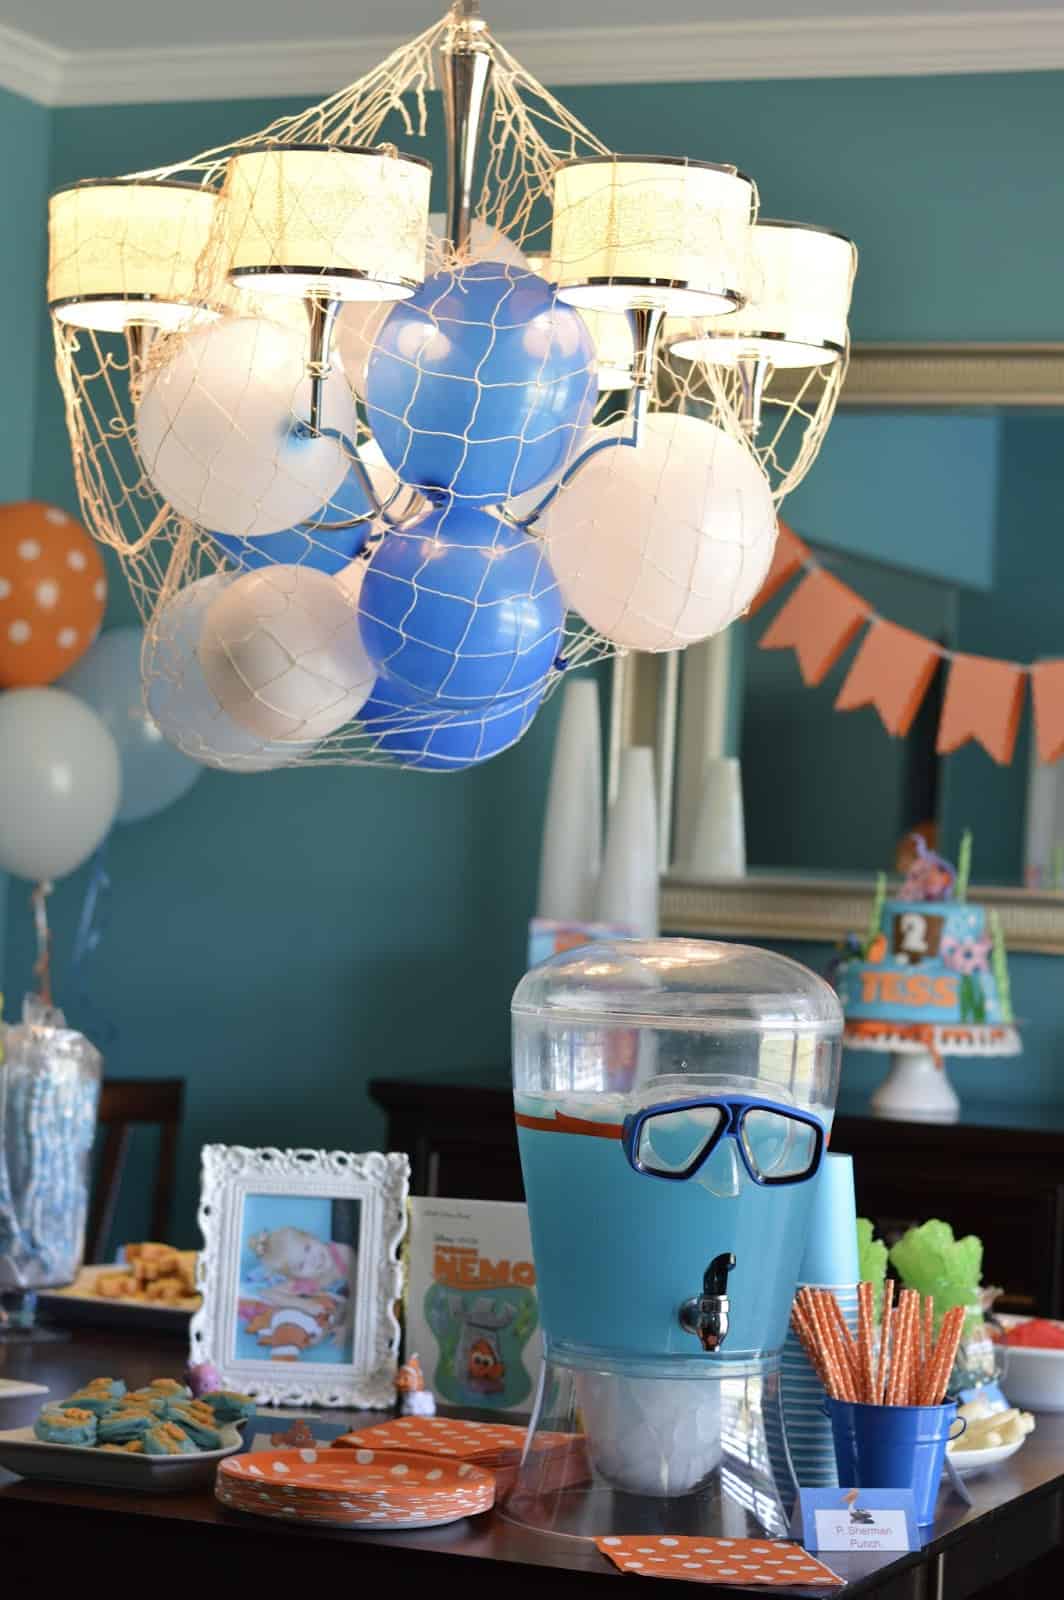 Finding Nemo Birthday Party Ideas: Food, Decor & More! - The Journey of  Parenthood